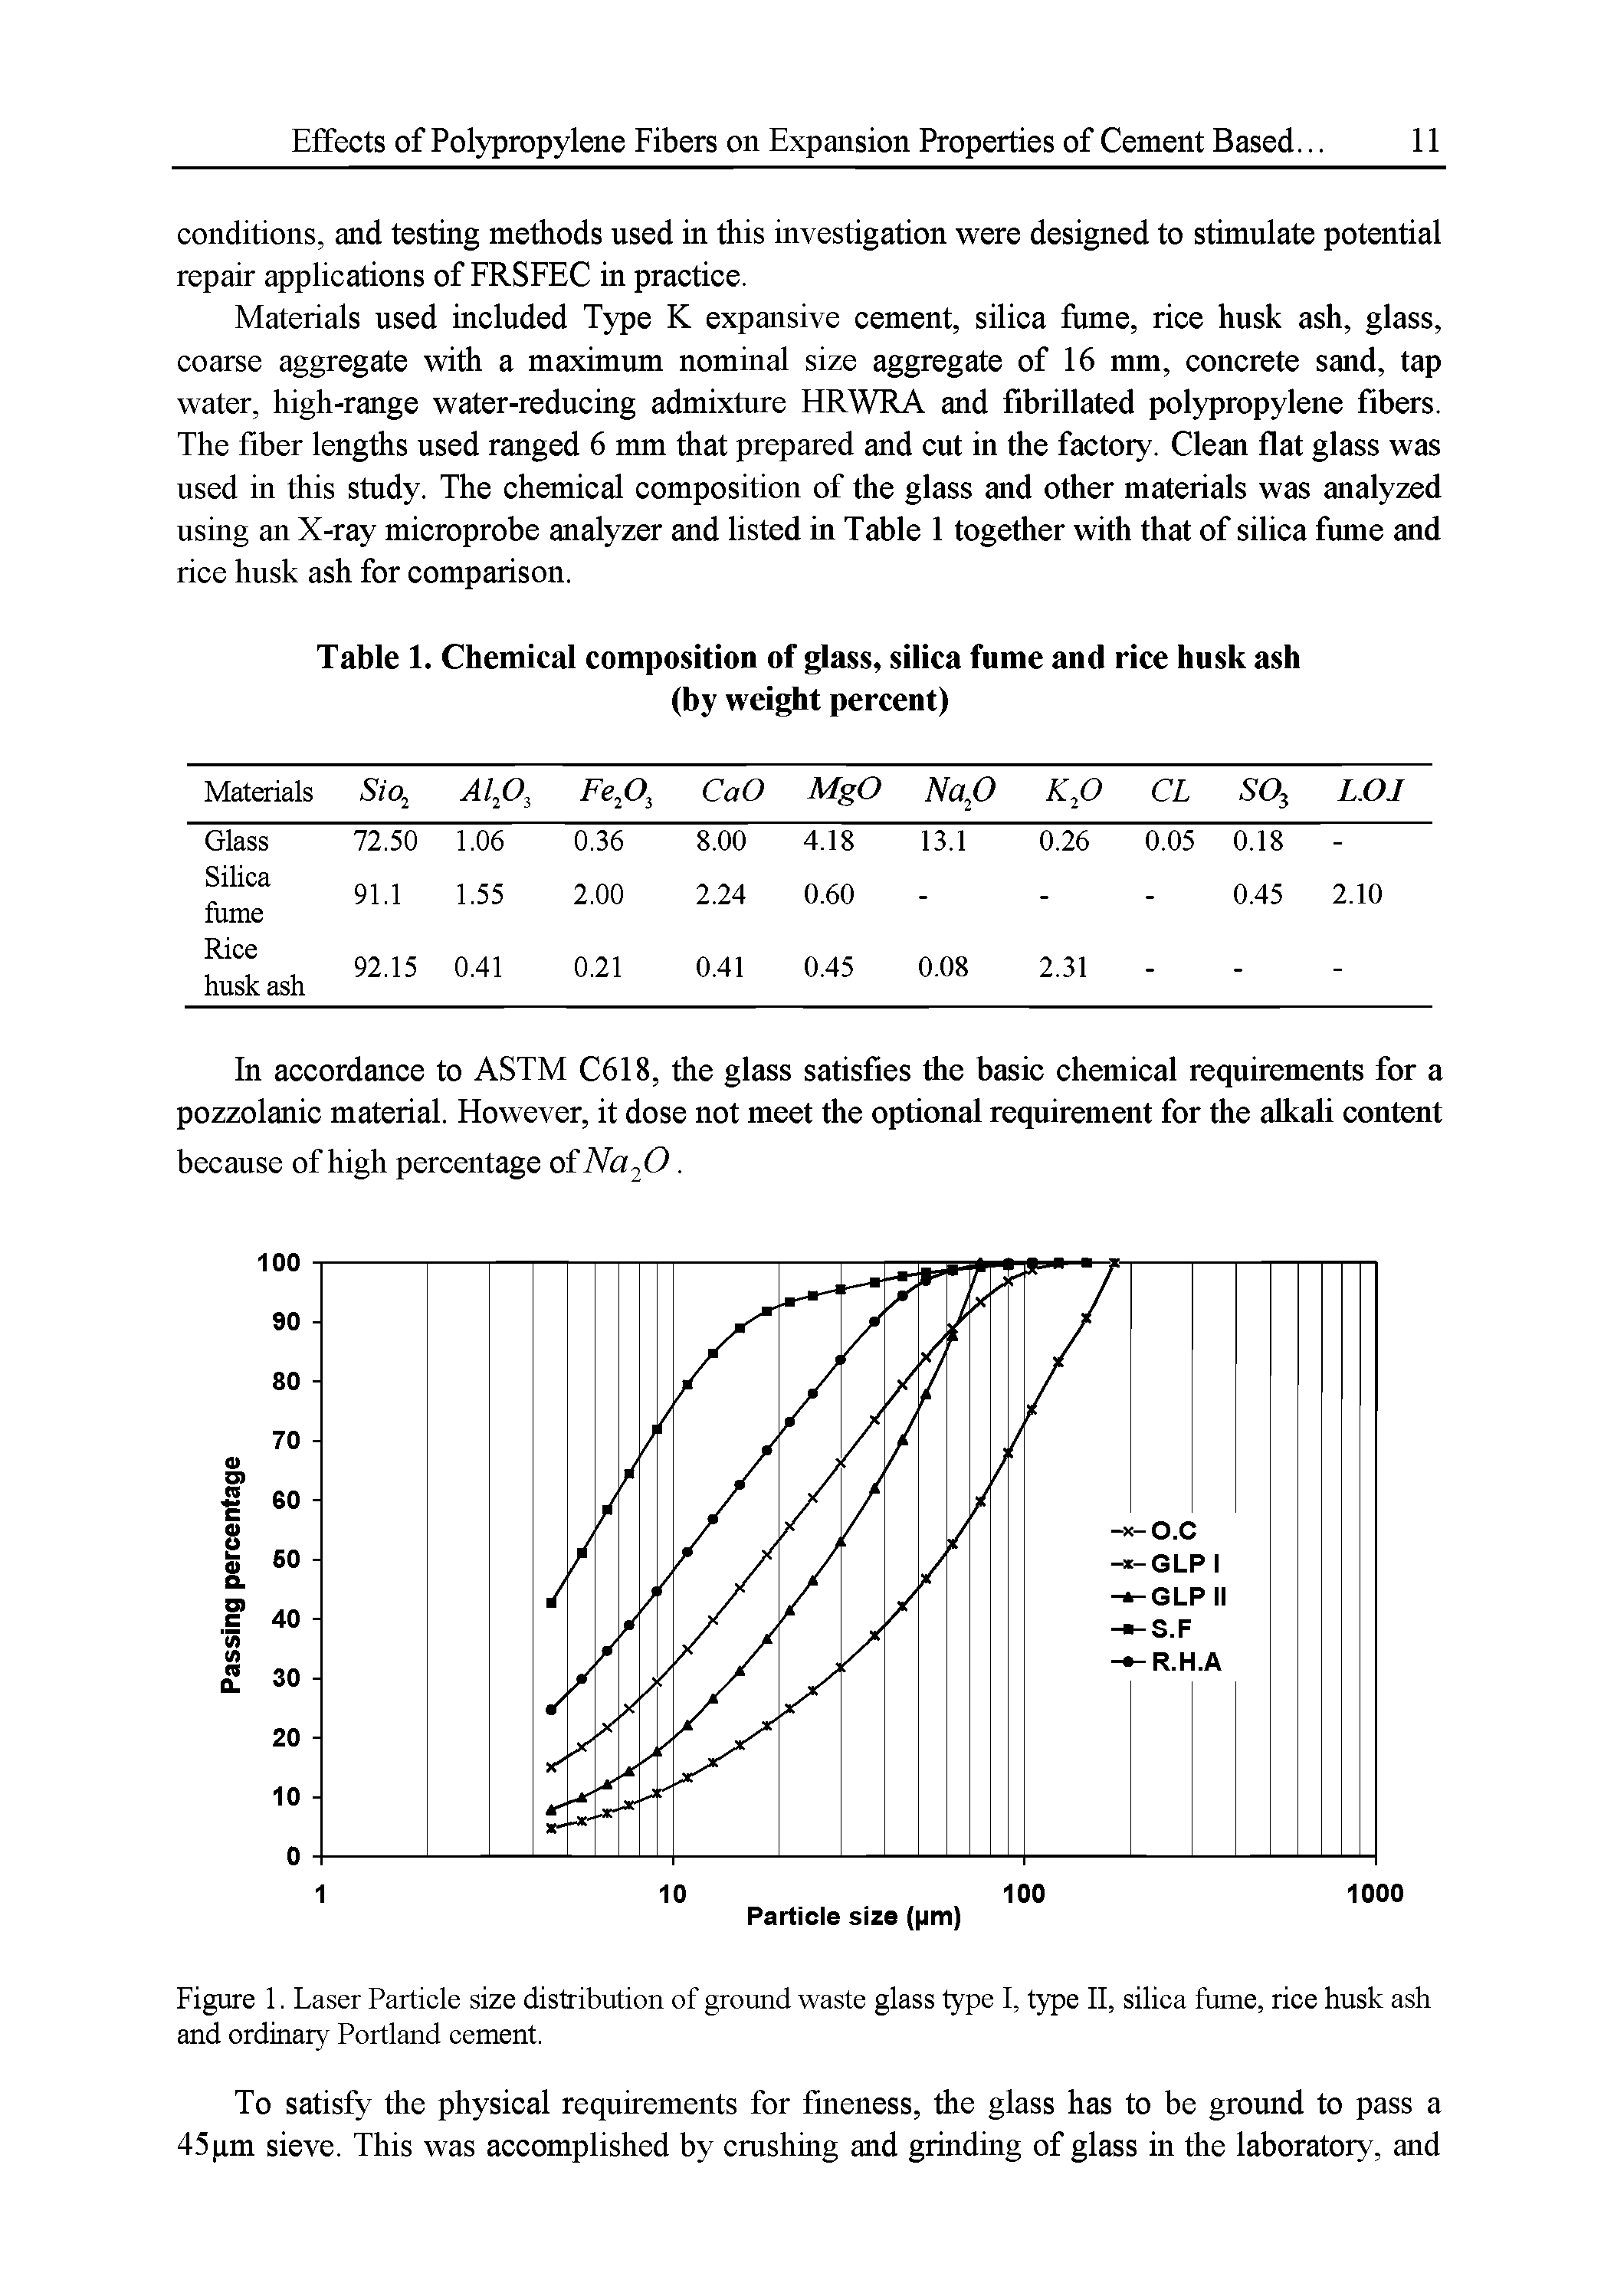 Figure 1. Laser Particle size distribution of ground waste glass type I, type II, silica fume, rice husk ash and ordinary Portland cement.